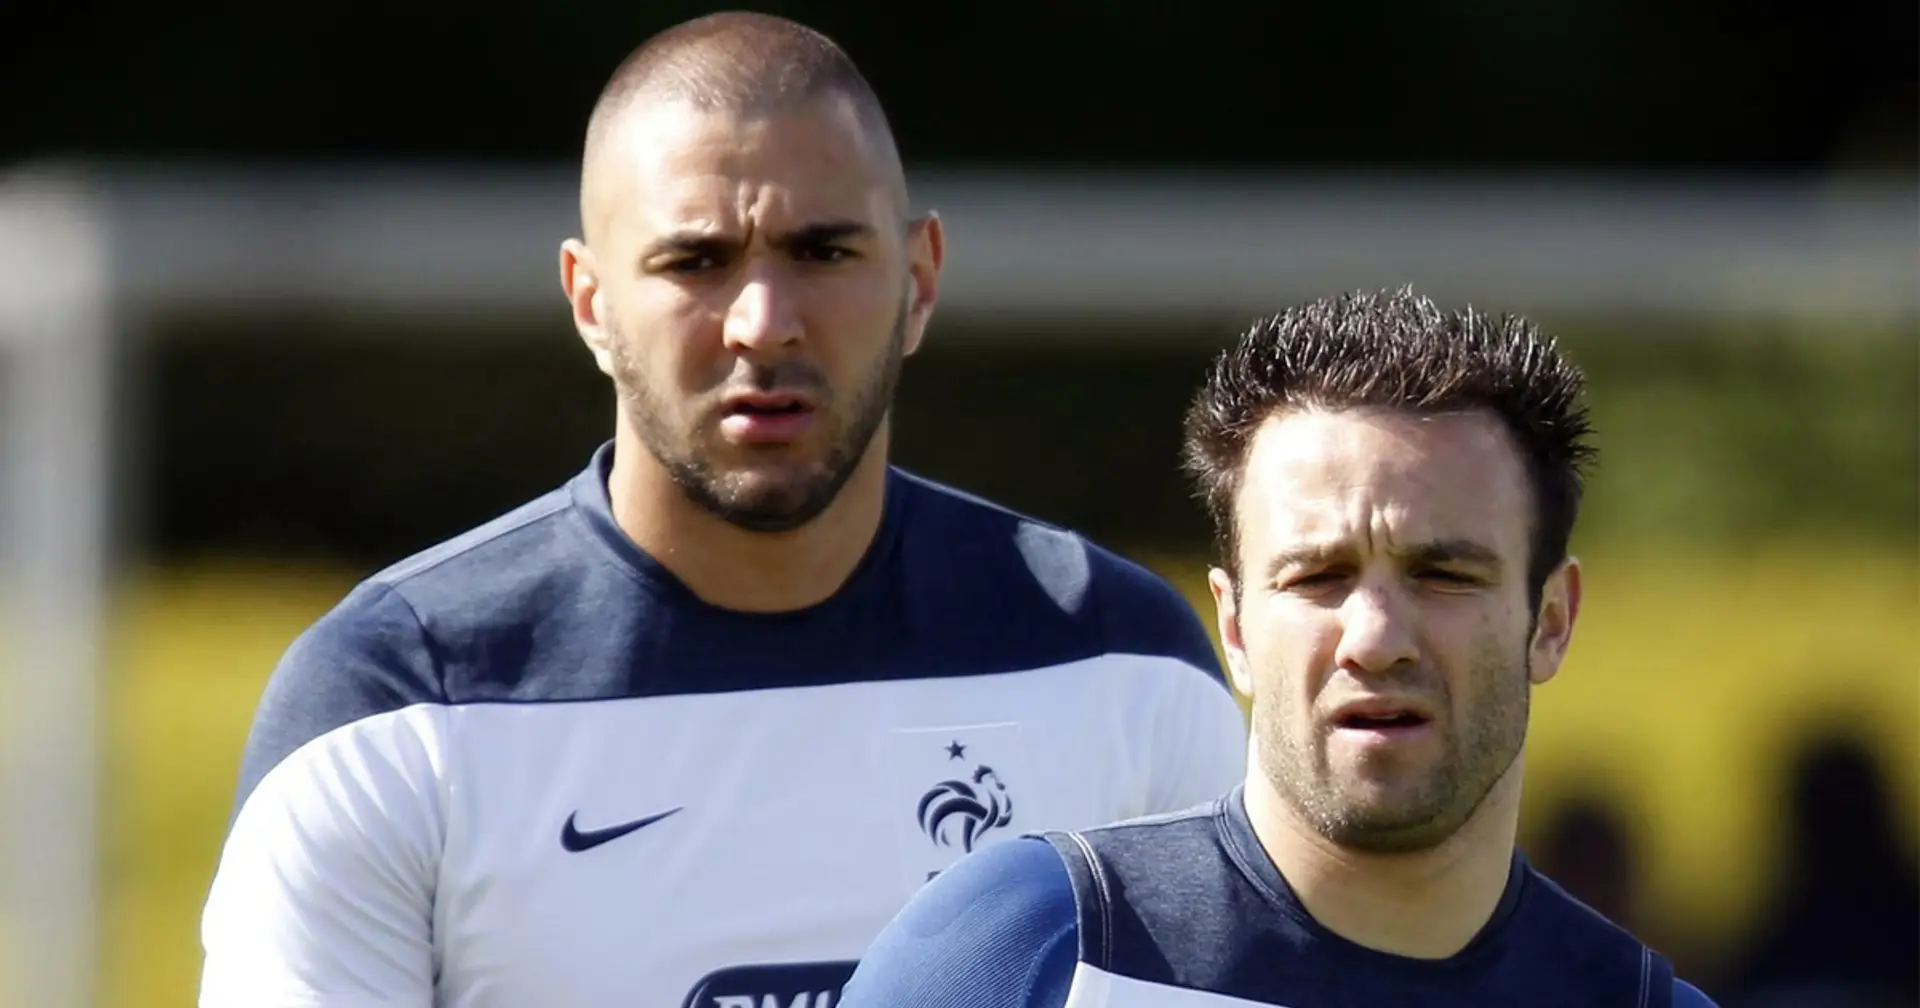 Benzema's lawyer confirms French prosecutors seek trial for Karim over Matthieu Valbuena sex-tape case